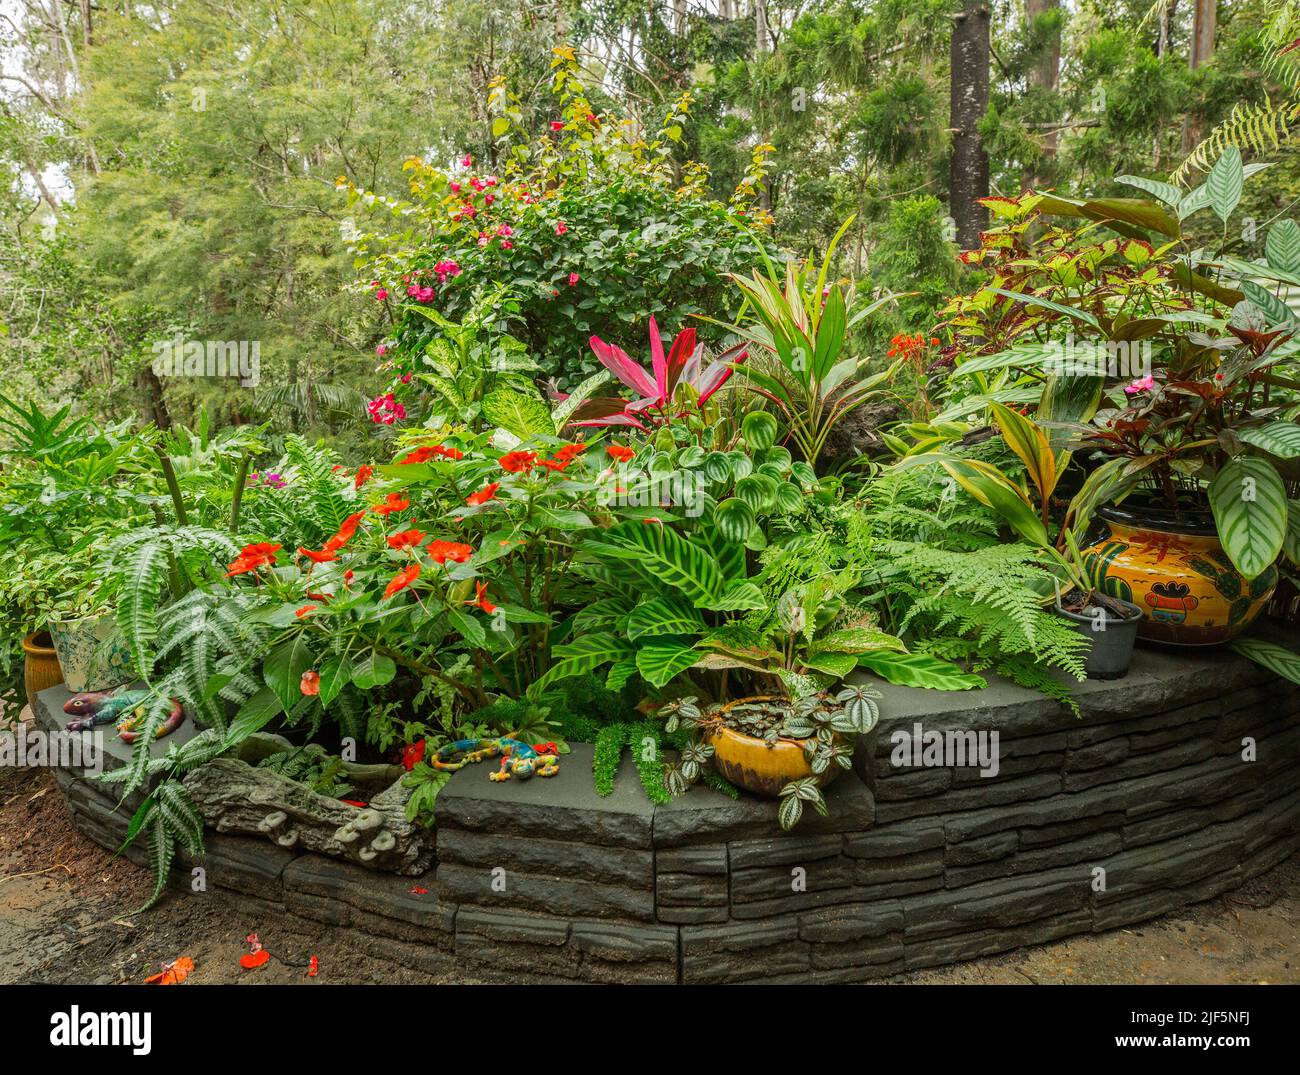 Colourful garden with mass of lush ferns, fooliage and flowering plants all growing in containers that are concealed by decorative low wall, Australia Stock Photo